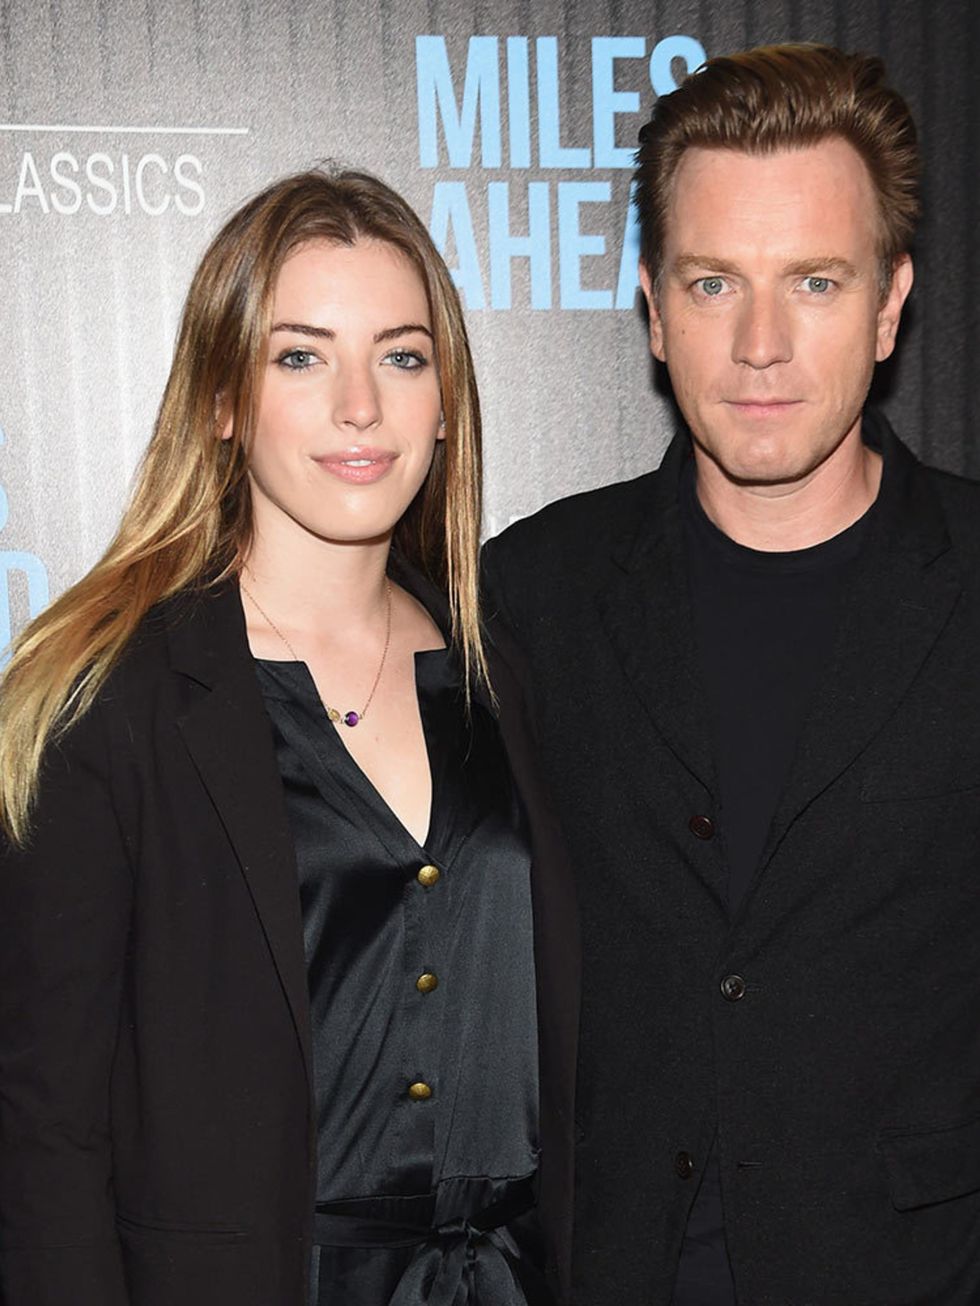 <p>Clara McGregor</p>

<p>Clara (a budding photographer), stepped out with dad Evan for a screening of Miles Ahead in New York, March 2016.</p>